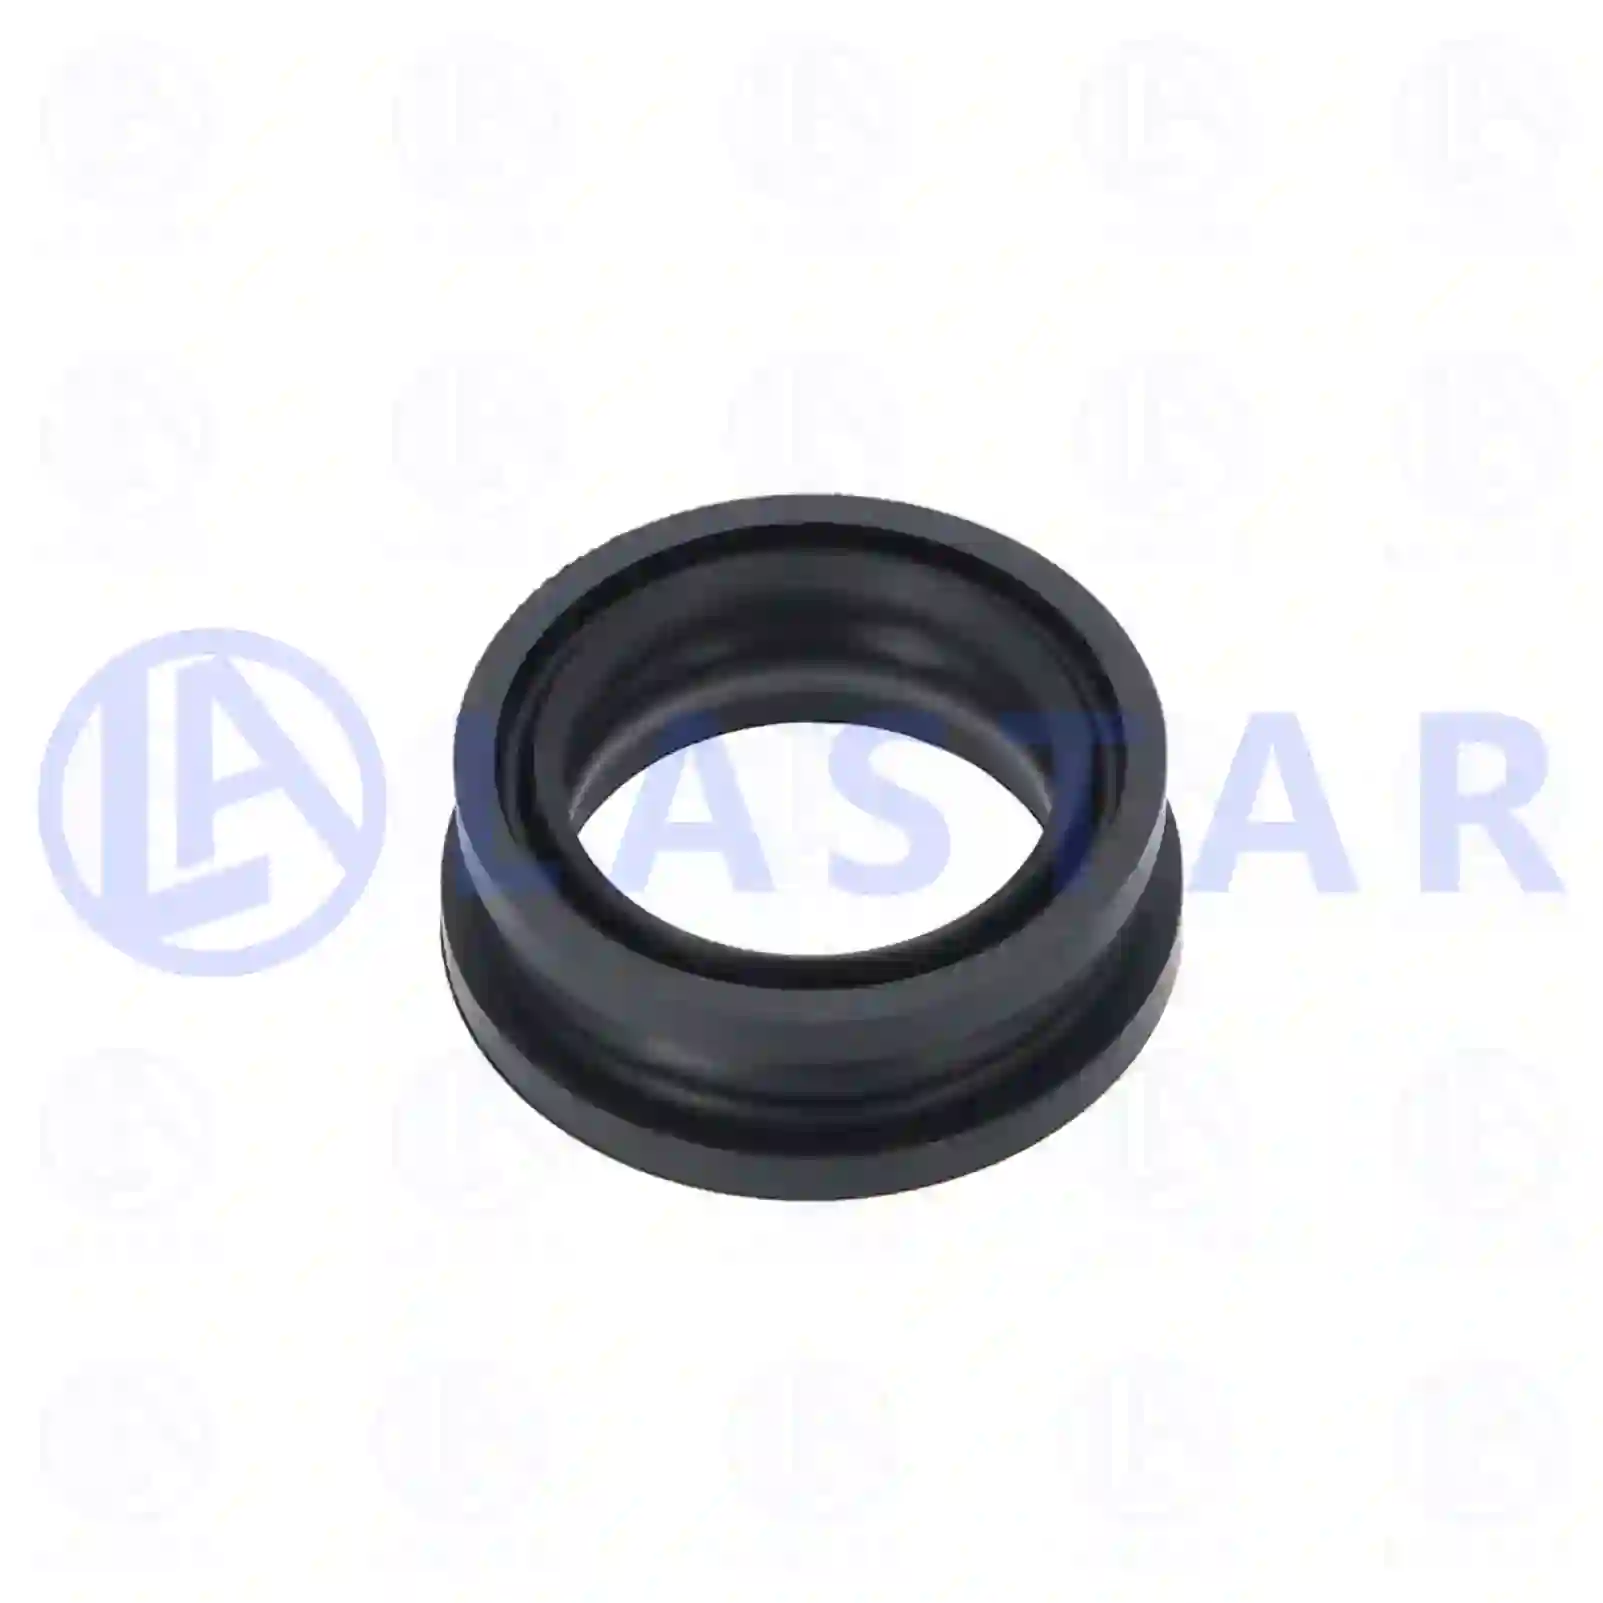  Seal ring, nozzle holder || Lastar Spare Part | Truck Spare Parts, Auotomotive Spare Parts